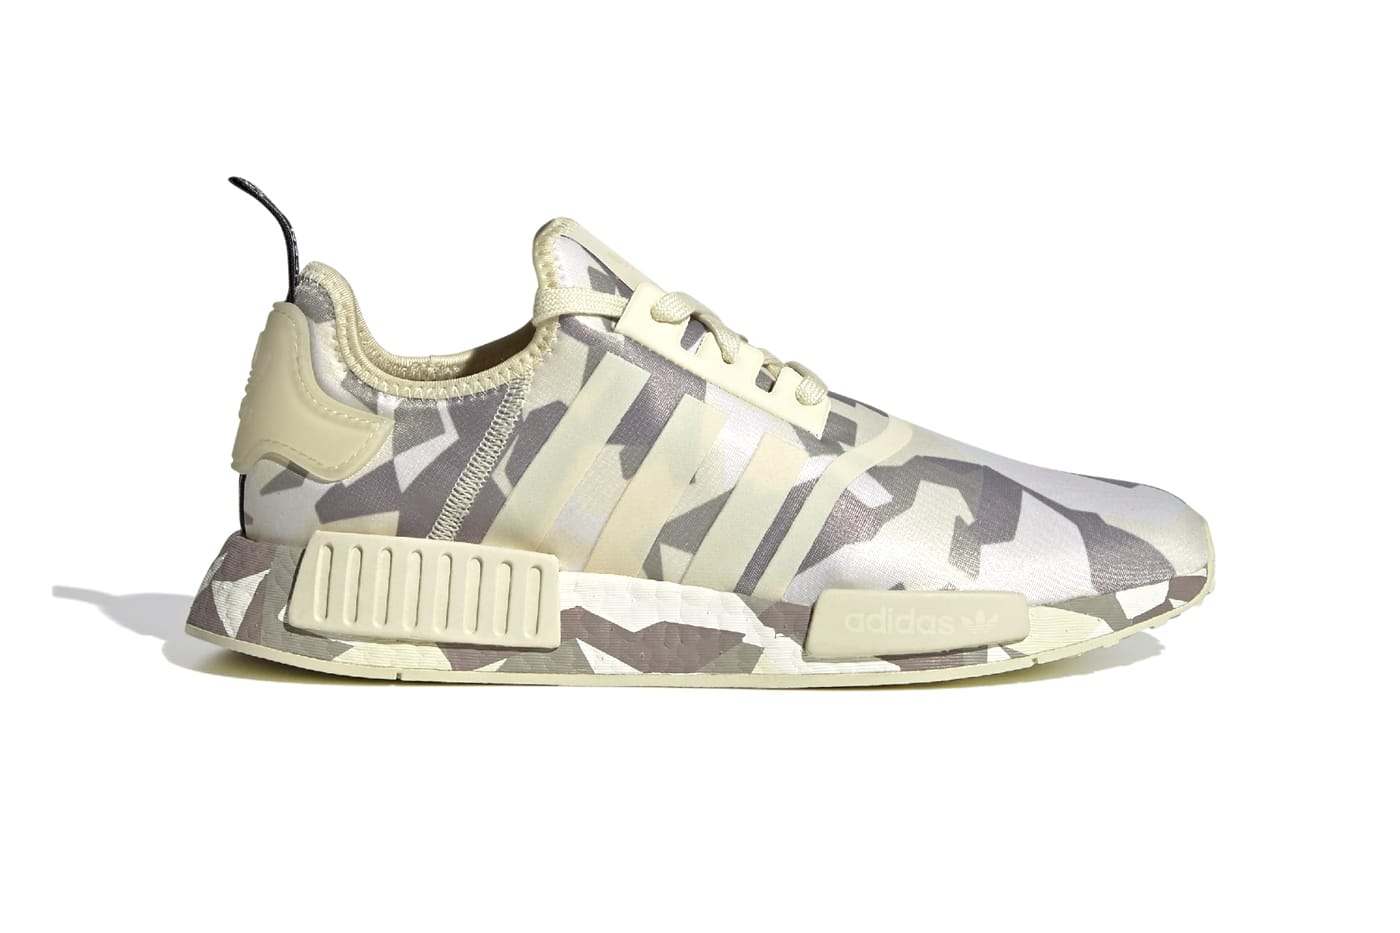 Adidas Originals NMD XR1 PK Military Green Netshoes Sneakers